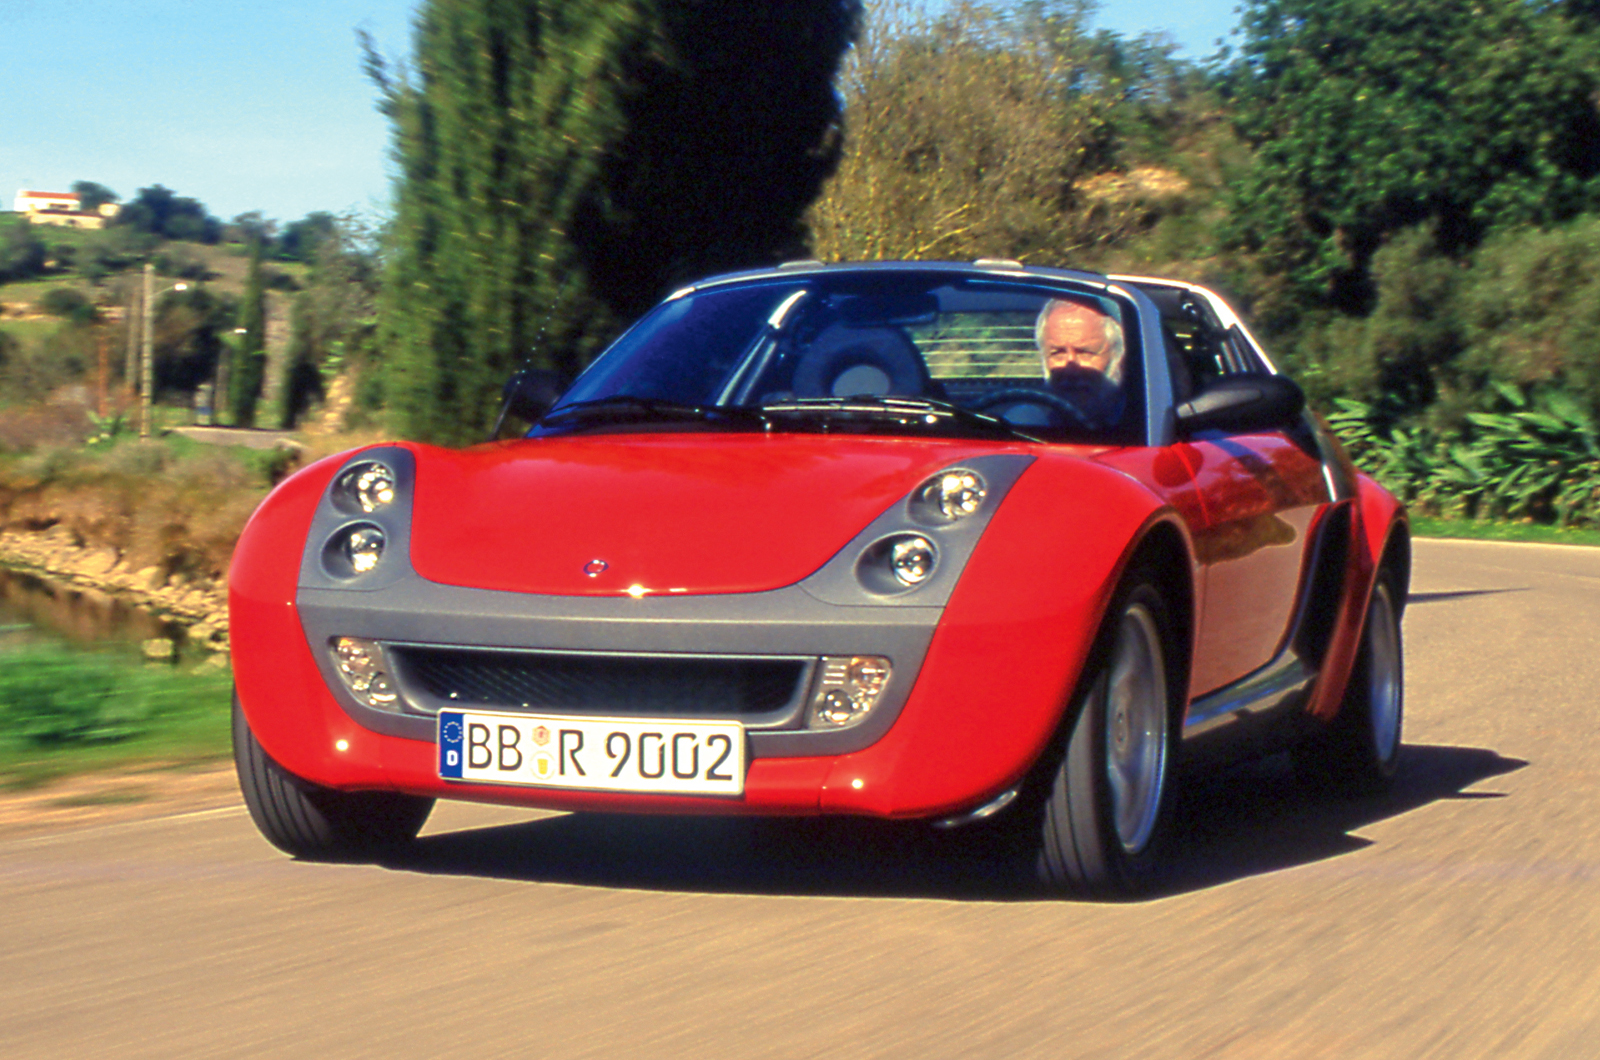 Used car buying guide: Smart Roadster